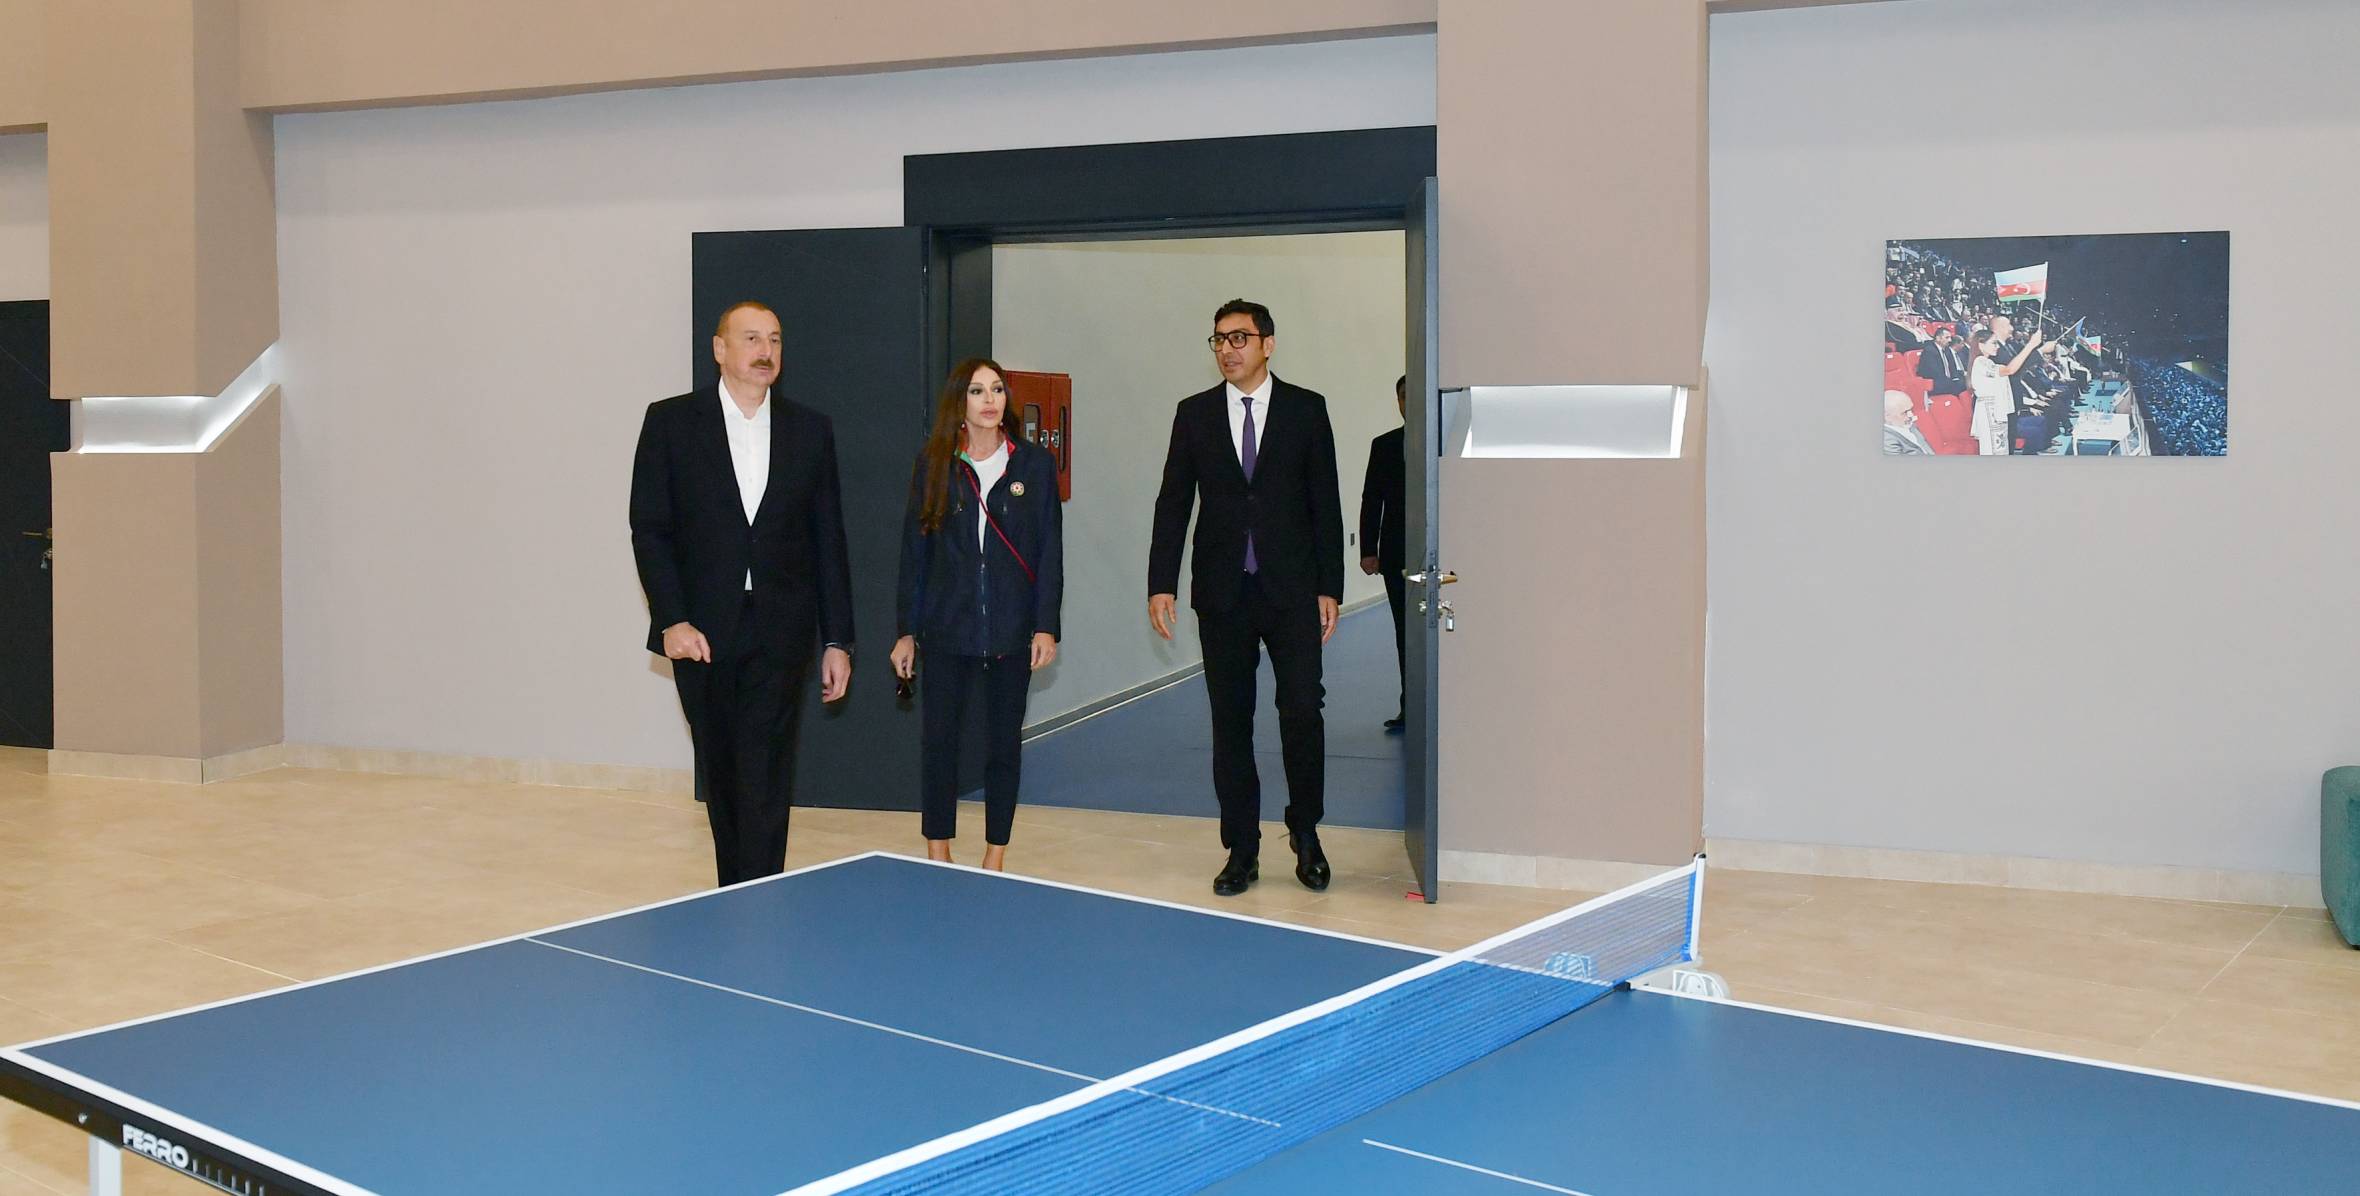 Ilham Aliyev and First Lady Mehriban Aliyeva have attended the Neftchala Olympic Sports Complex opening